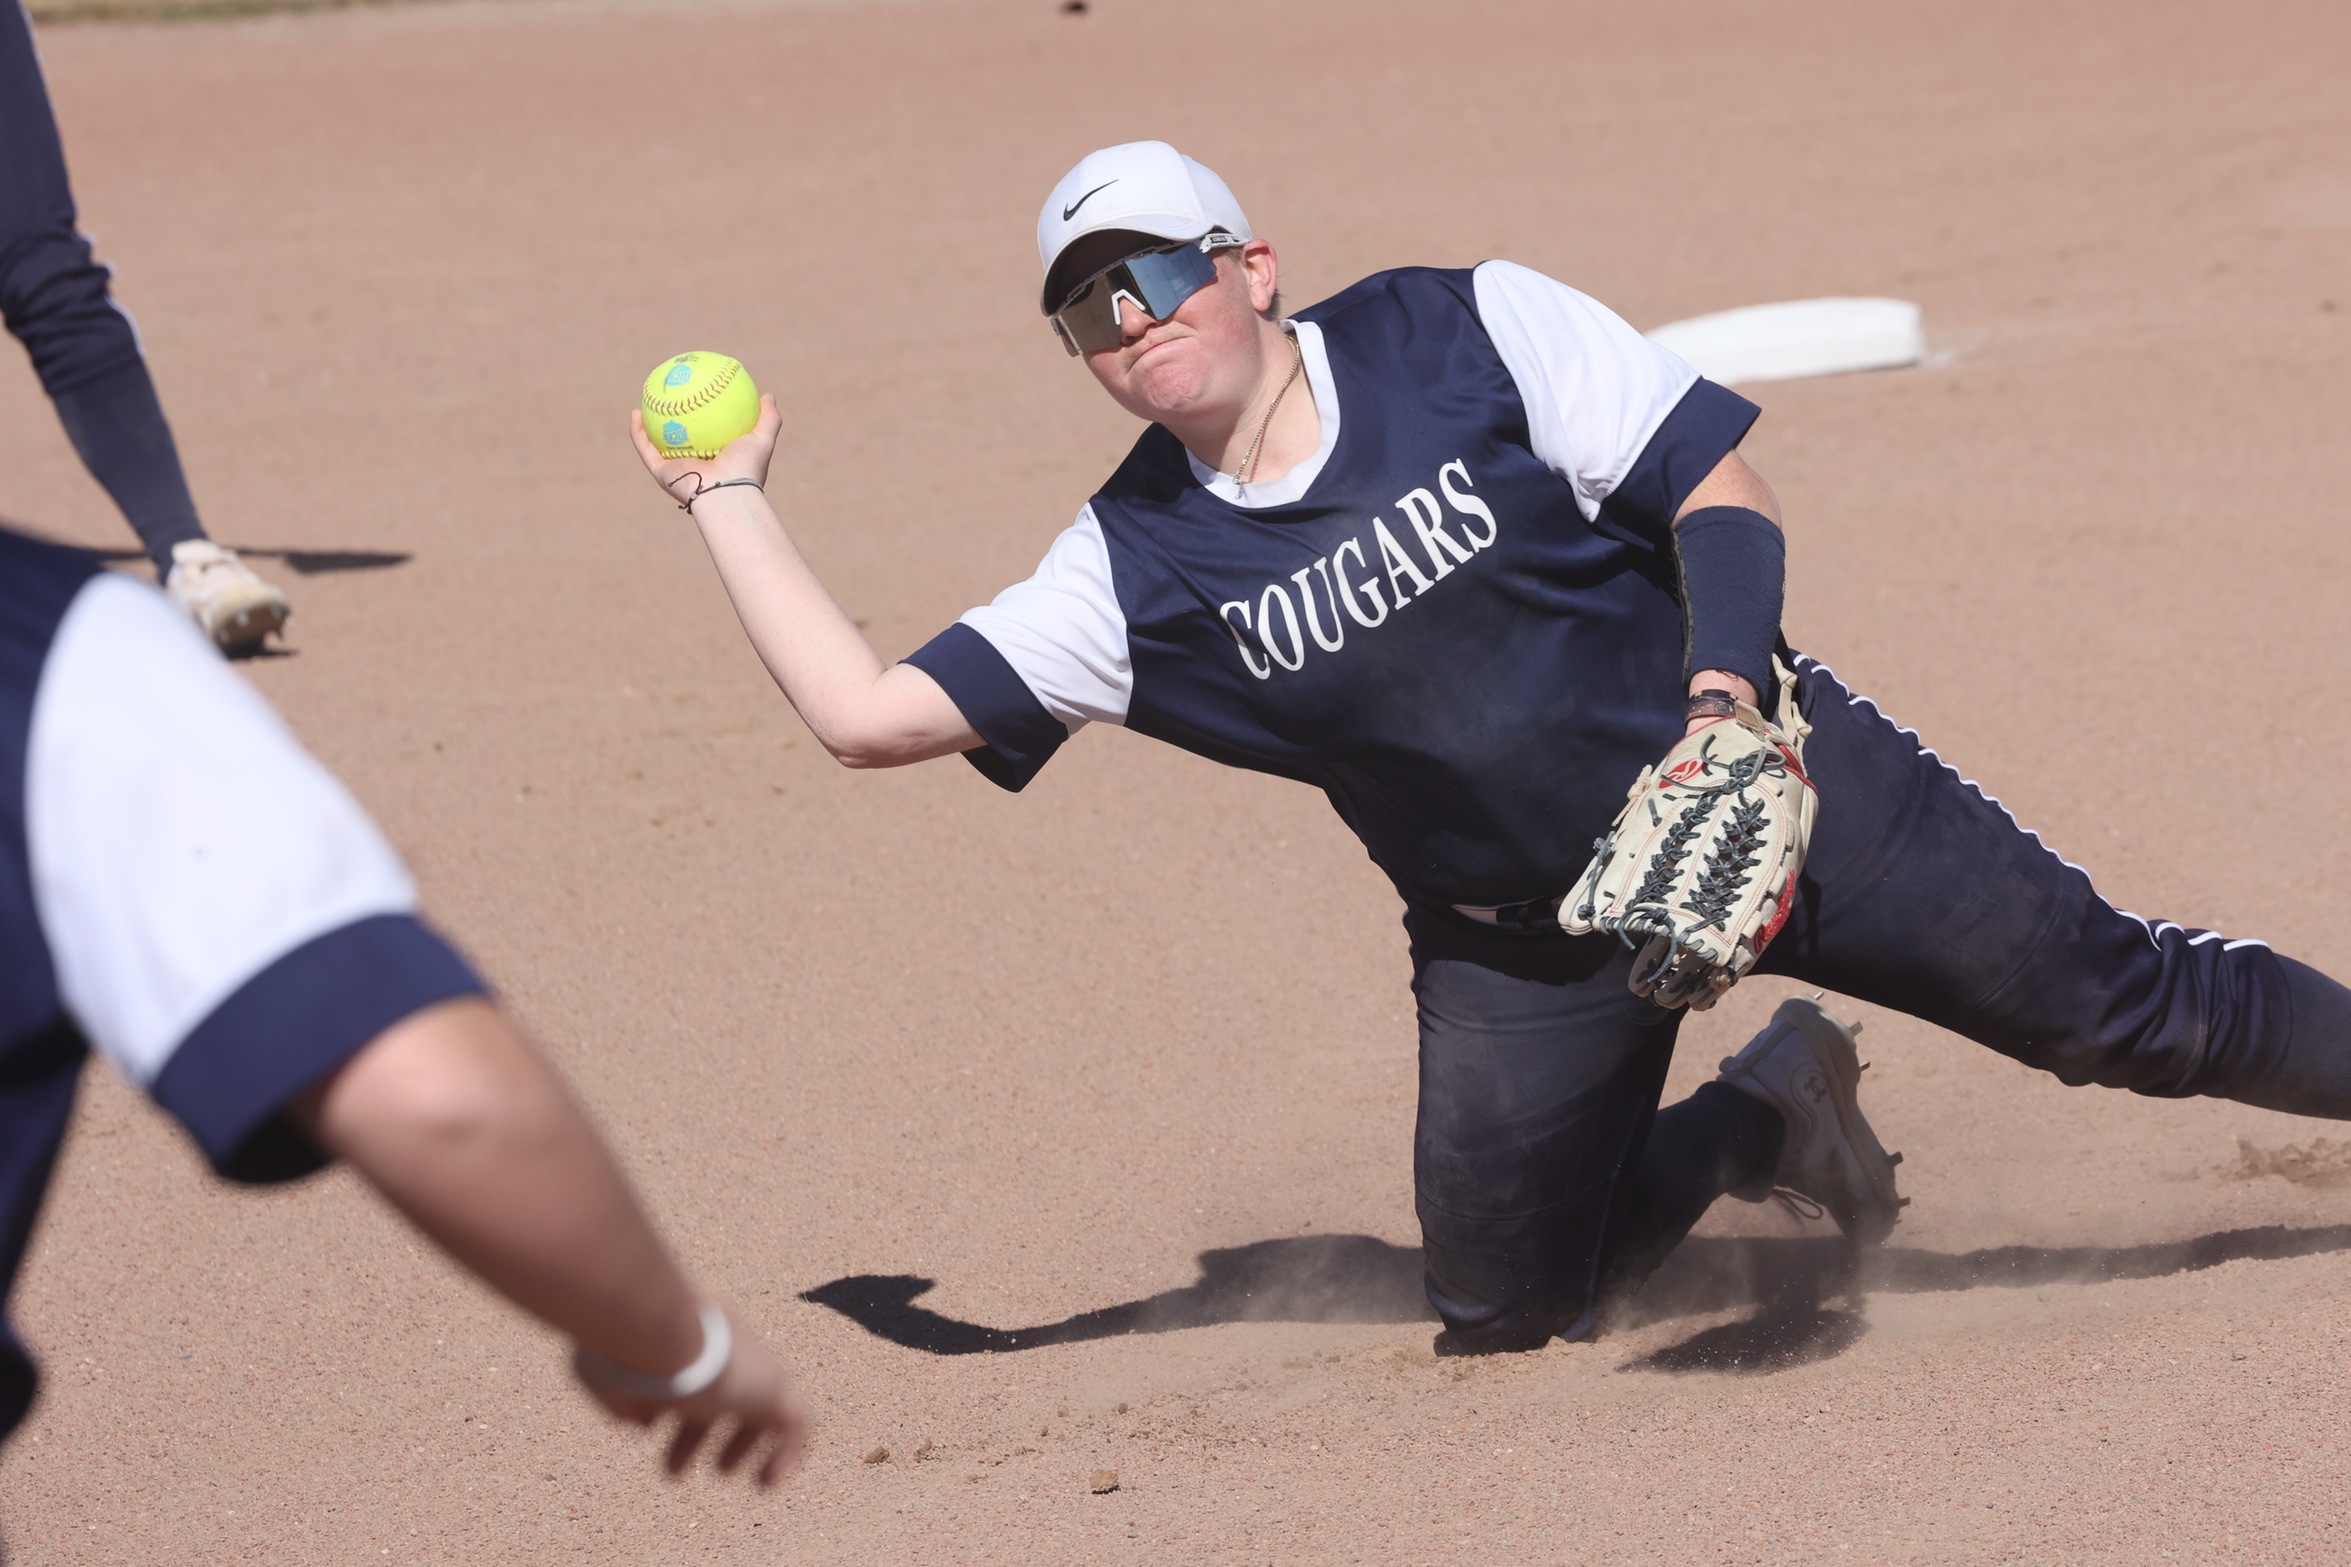 Sierra Hilgner throws to first base from her second base position for an out.